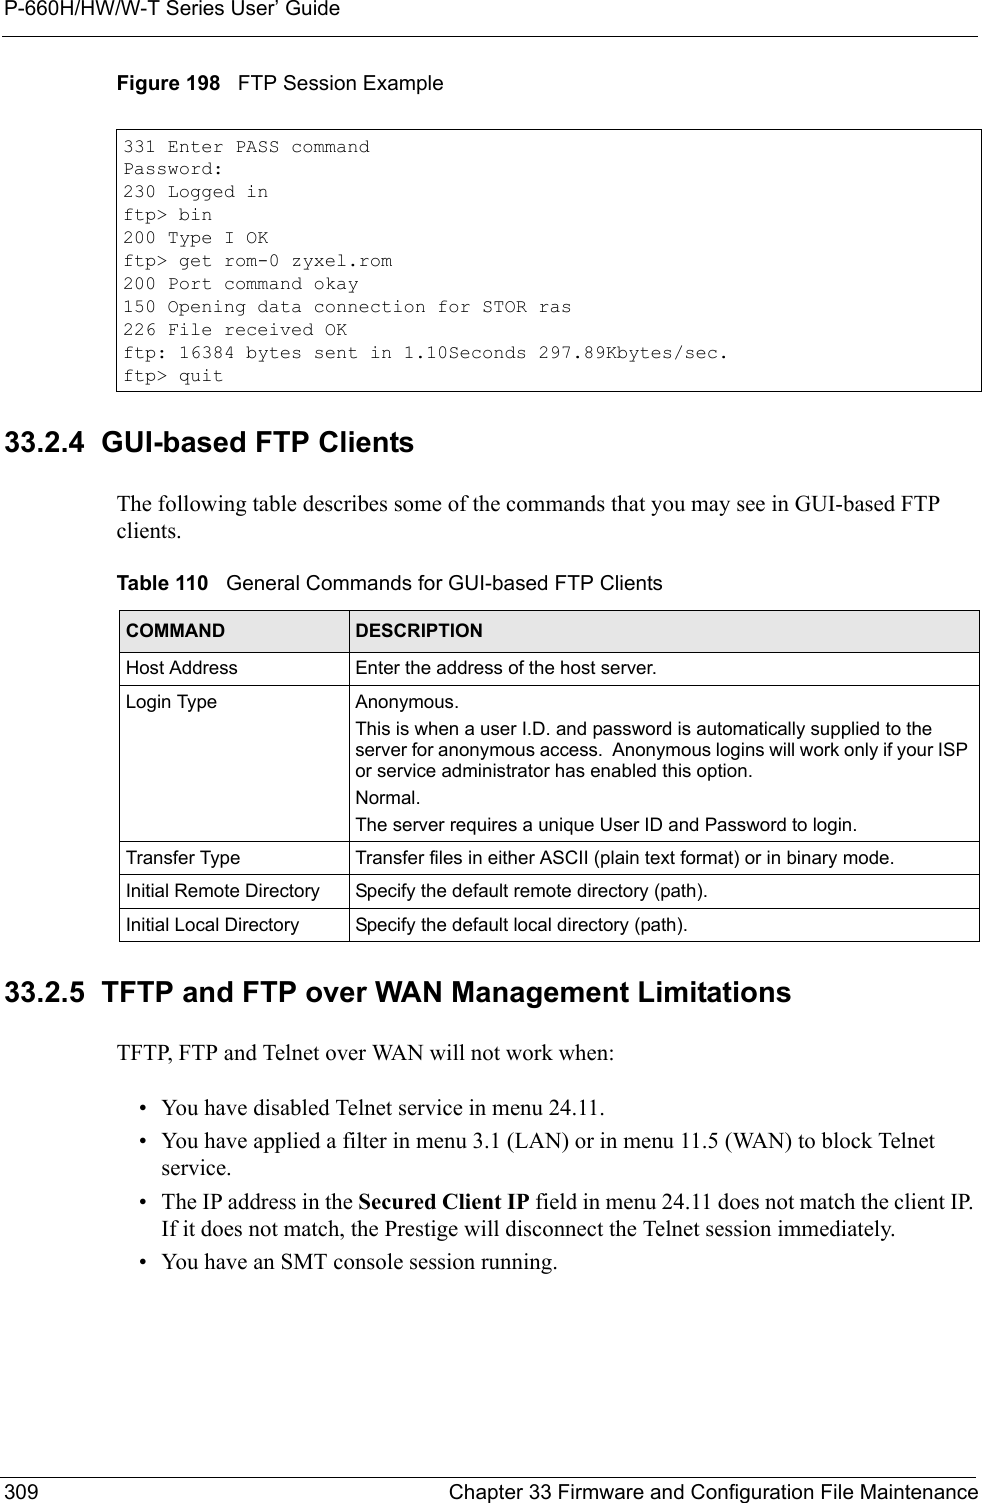 P-660H/HW/W-T Series User’ Guide309 Chapter 33 Firmware and Configuration File MaintenanceFigure 198   FTP Session Example33.2.4  GUI-based FTP ClientsThe following table describes some of the commands that you may see in GUI-based FTP clients.33.2.5  TFTP and FTP over WAN Management LimitationsTFTP, FTP and Telnet over WAN will not work when:• You have disabled Telnet service in menu 24.11.• You have applied a filter in menu 3.1 (LAN) or in menu 11.5 (WAN) to block Telnet service.• The IP address in the Secured Client IP field in menu 24.11 does not match the client IP. If it does not match, the Prestige will disconnect the Telnet session immediately.• You have an SMT console session running.331 Enter PASS commandPassword:230 Logged inftp&gt; bin200 Type I OKftp&gt; get rom-0 zyxel.rom200 Port command okay150 Opening data connection for STOR ras226 File received OKftp: 16384 bytes sent in 1.10Seconds 297.89Kbytes/sec.ftp&gt; quitTable 110   General Commands for GUI-based FTP ClientsCOMMAND DESCRIPTIONHost Address Enter the address of the host server.Login Type Anonymous.This is when a user I.D. and password is automatically supplied to the server for anonymous access.  Anonymous logins will work only if your ISP or service administrator has enabled this option.Normal.  The server requires a unique User ID and Password to login.Transfer Type Transfer files in either ASCII (plain text format) or in binary mode.Initial Remote Directory Specify the default remote directory (path).Initial Local Directory Specify the default local directory (path).